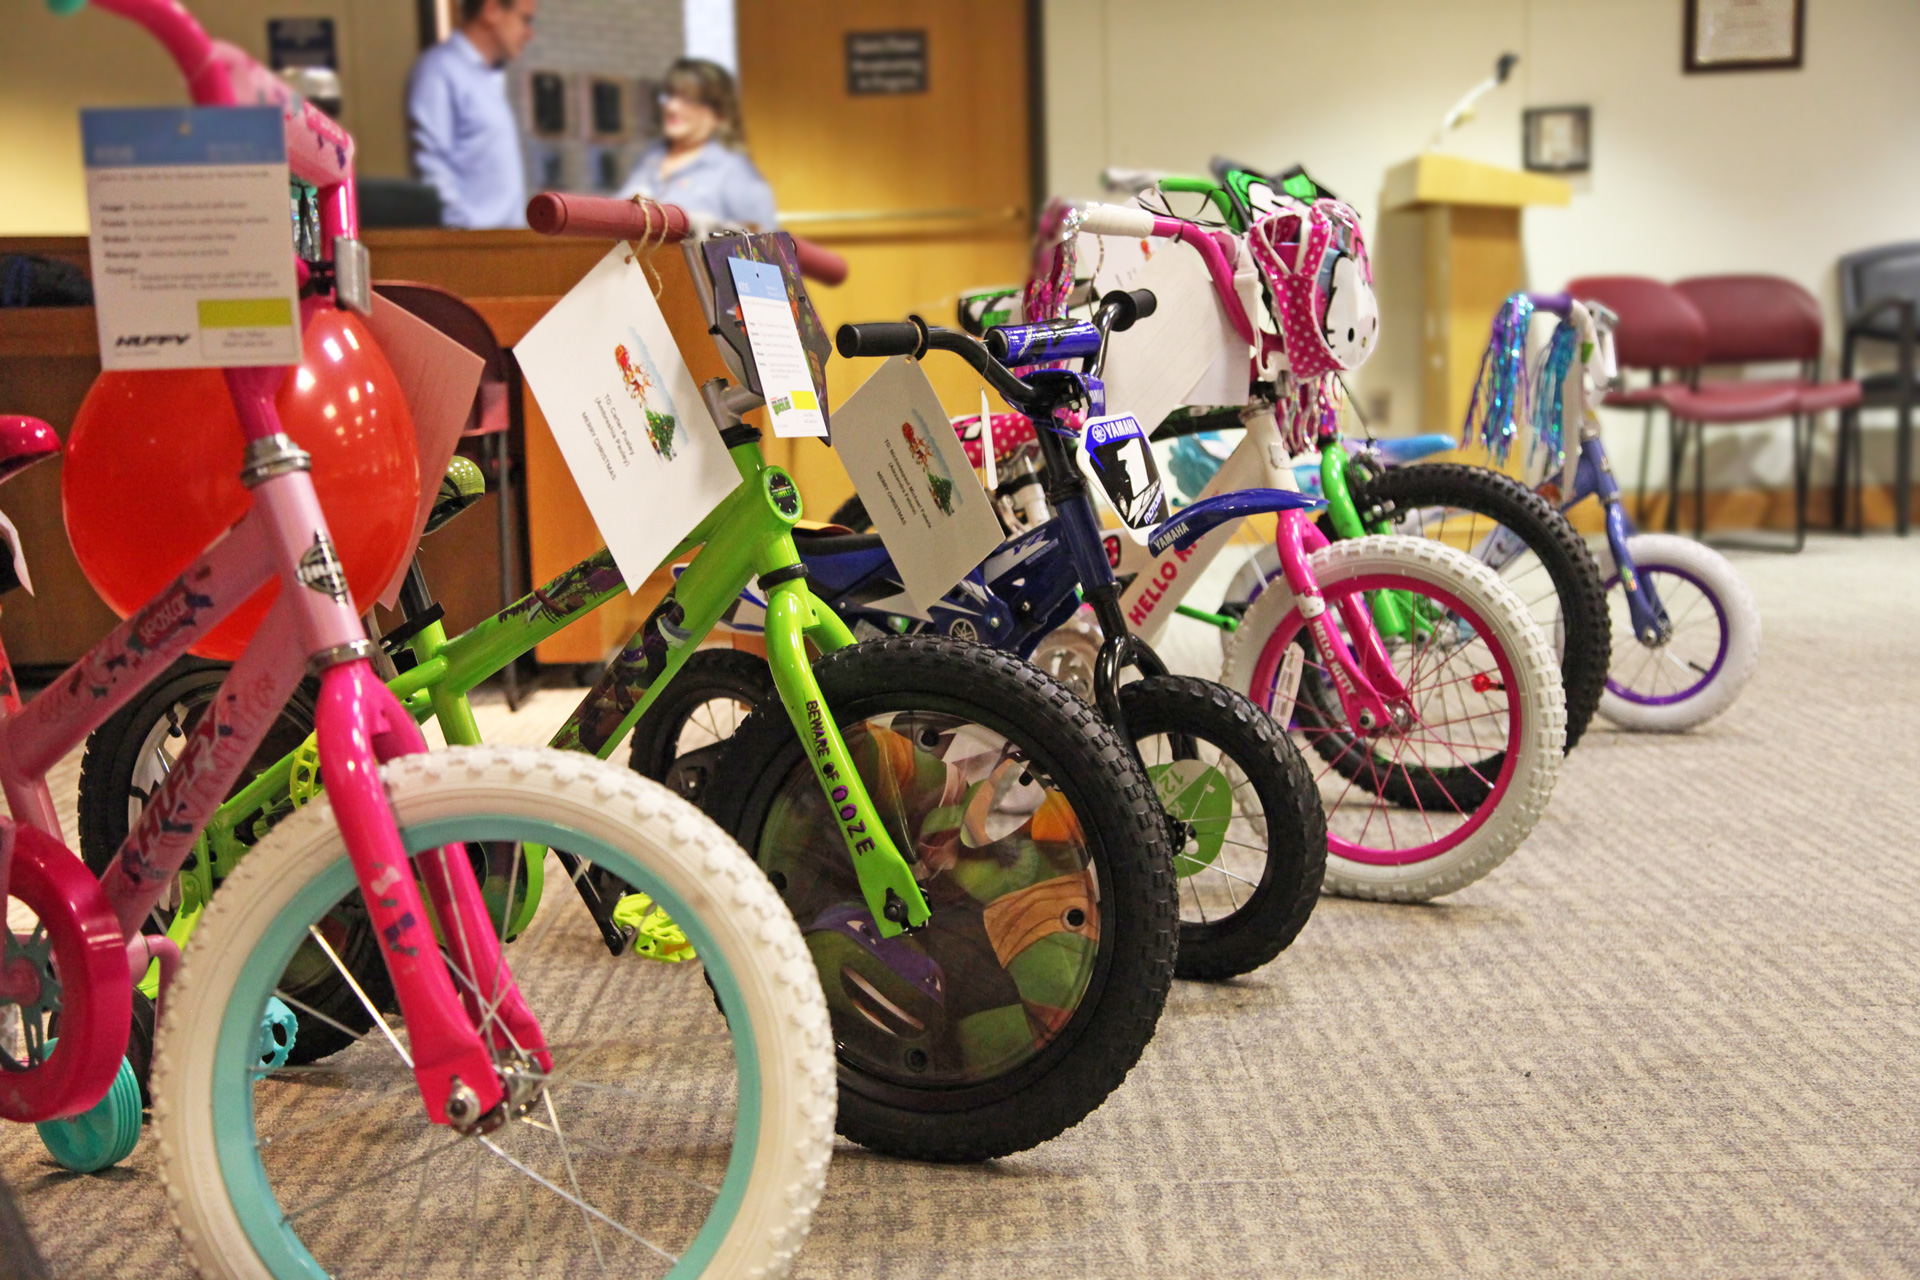 Earn-A-Bike to Donate 50 Bikes to Children from Low-income Families